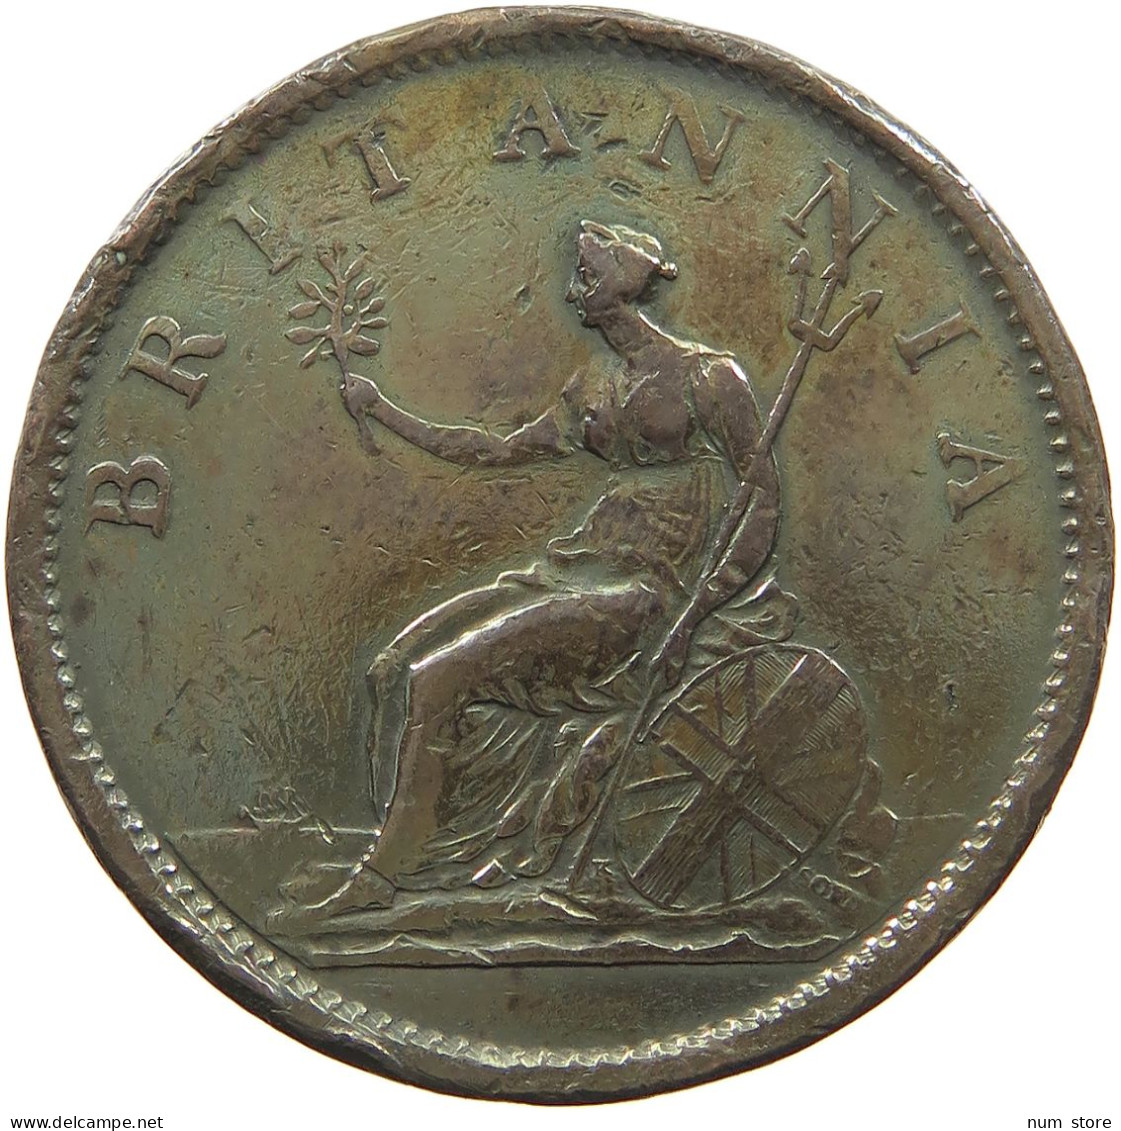 GREAT BRITAIN PENNY 1807 GEORGE III. 1760-1820 #MA 023012 - C. 1 Penny